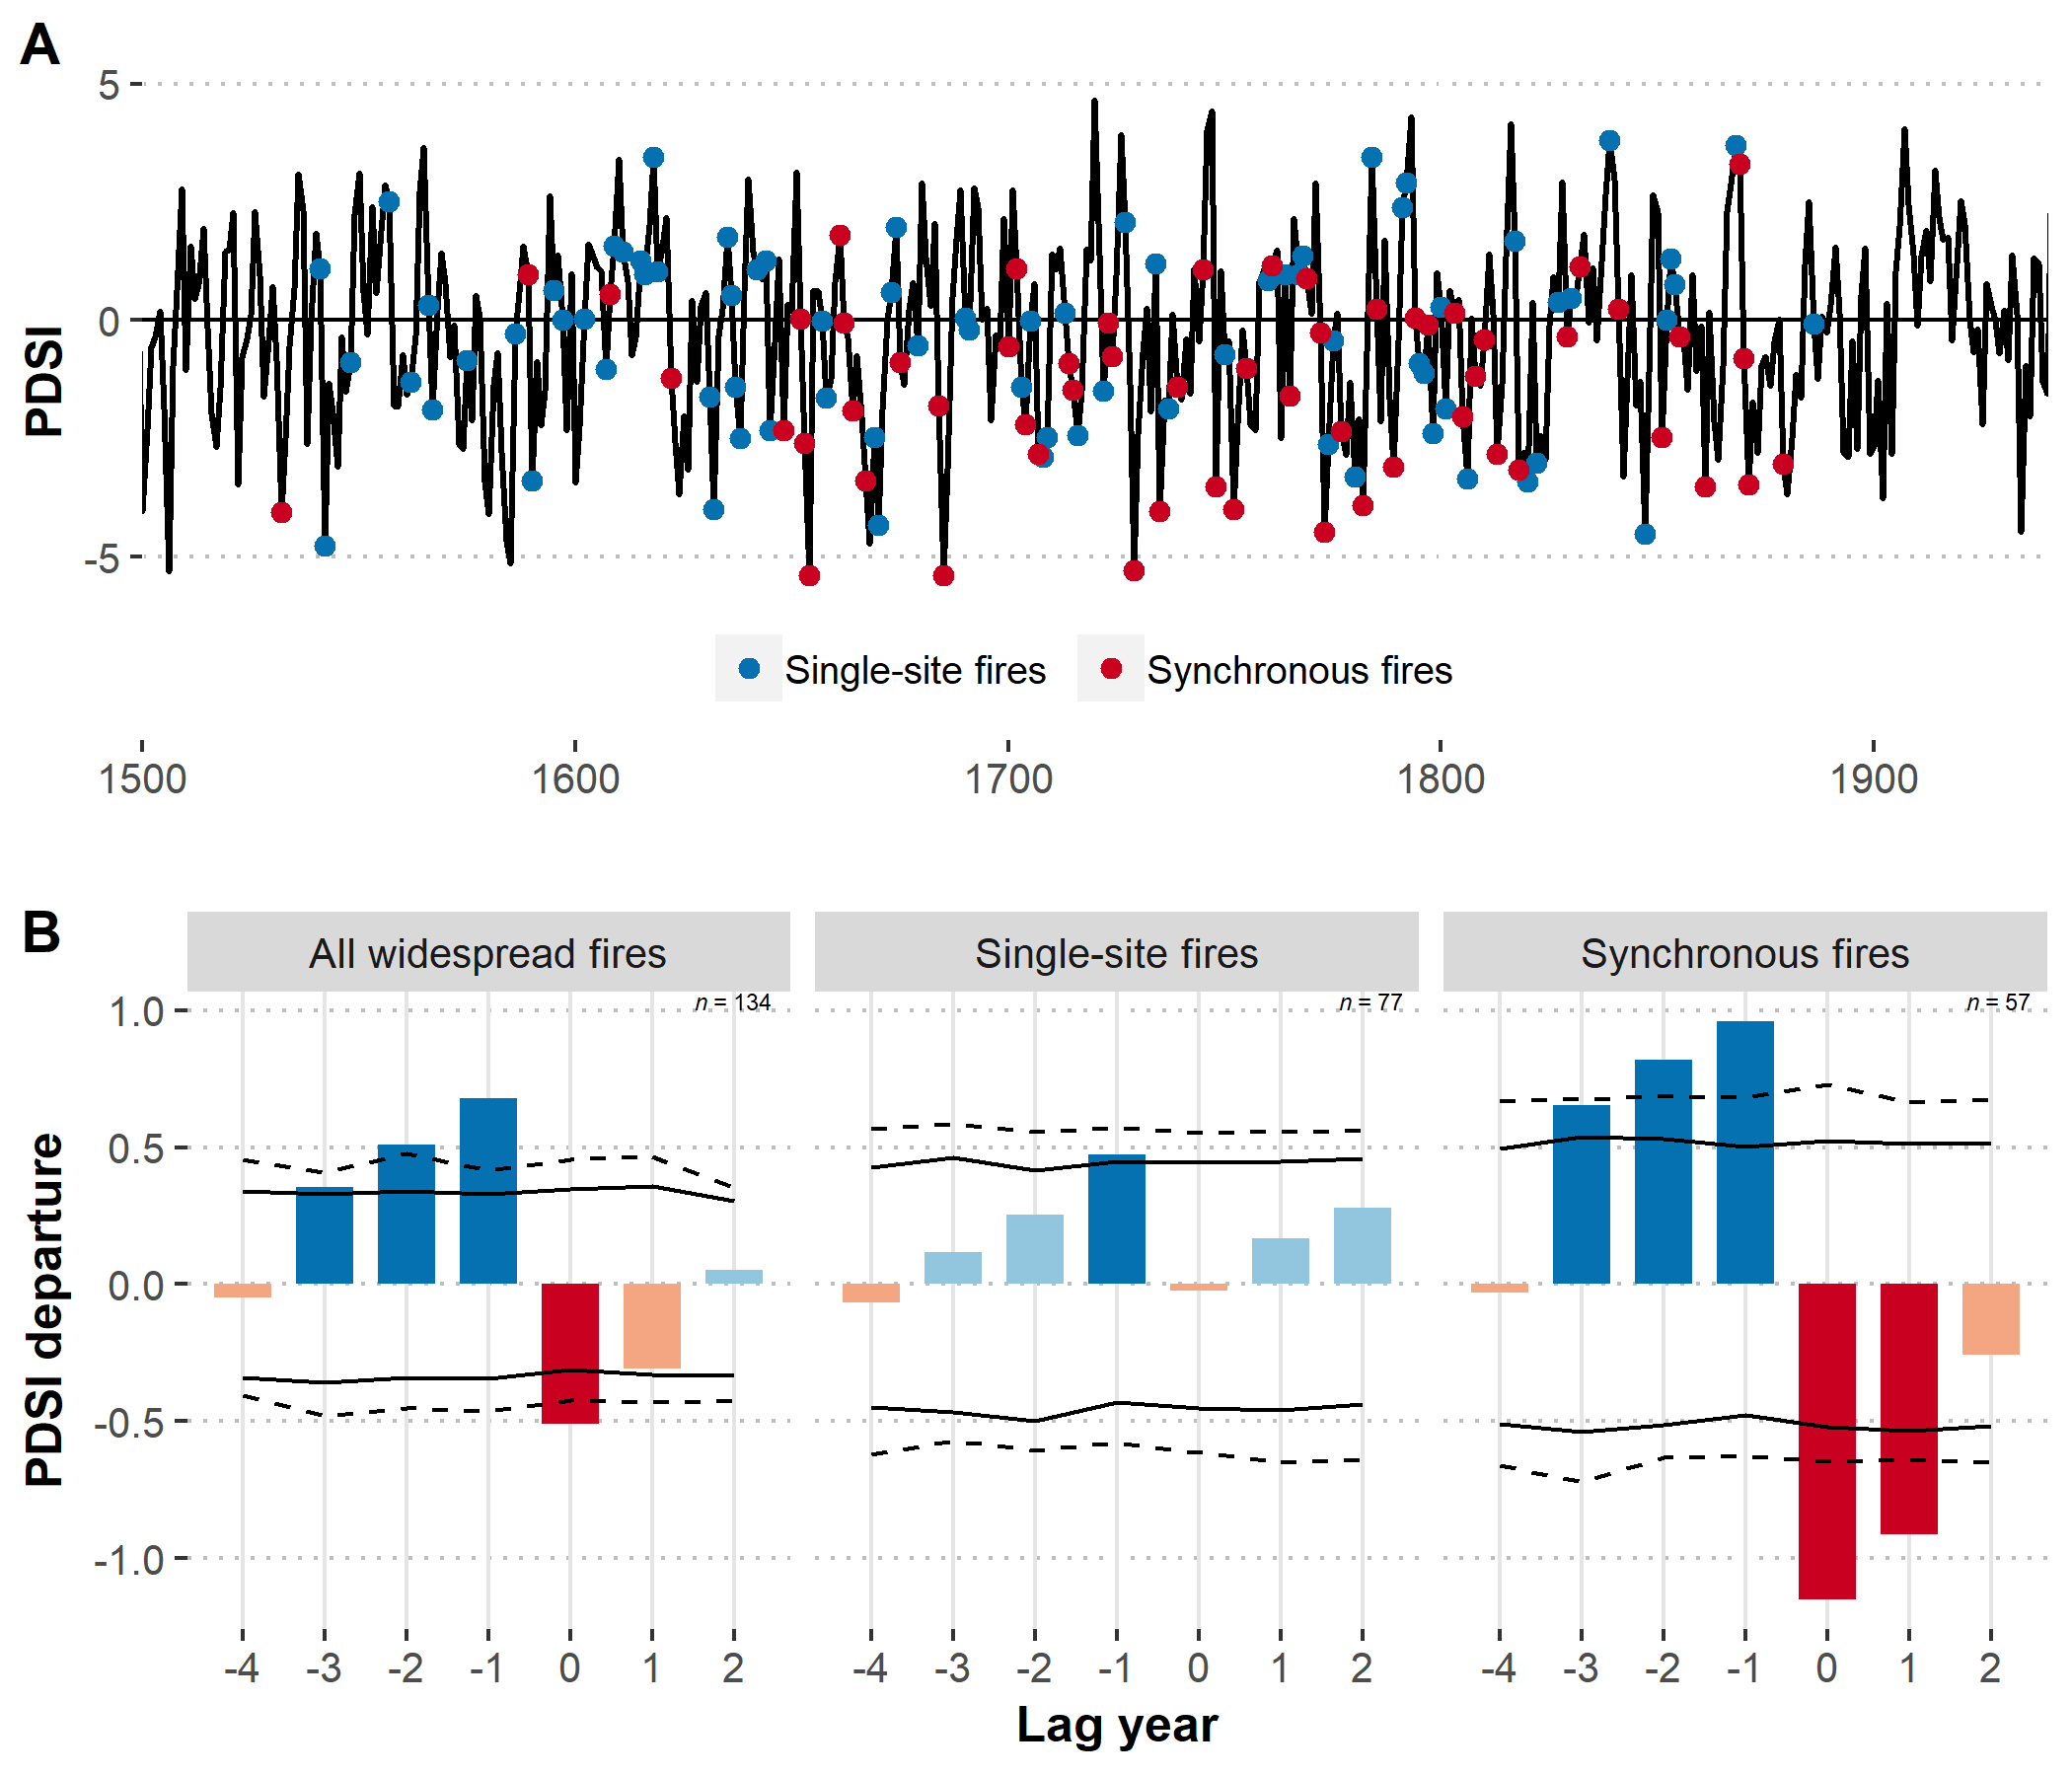 Historical fire-climate relationships in Navajo forests. (A) Temporal variation in Palmer Drought Severity Index [PDSI] with single-site and synchronous [multiple site] fire years superimposed on the timeseries. (B) Superposed Epoch Analysis [SEA] of the fire years. In SEA, the year of fire is the zero-lag year. PDSI is averaged for all fire years as well as the years before and after. The graphs in (B) show that for all widepsread fires and years of synchronous fire, signficant PDSI departures [i.e. drought] are required, as are up to three wet years before a fire. Significance of the PDSI timeseries was evaluated by bootstrapping PDSI. The number of fire years for each SEA is provided as the n value.